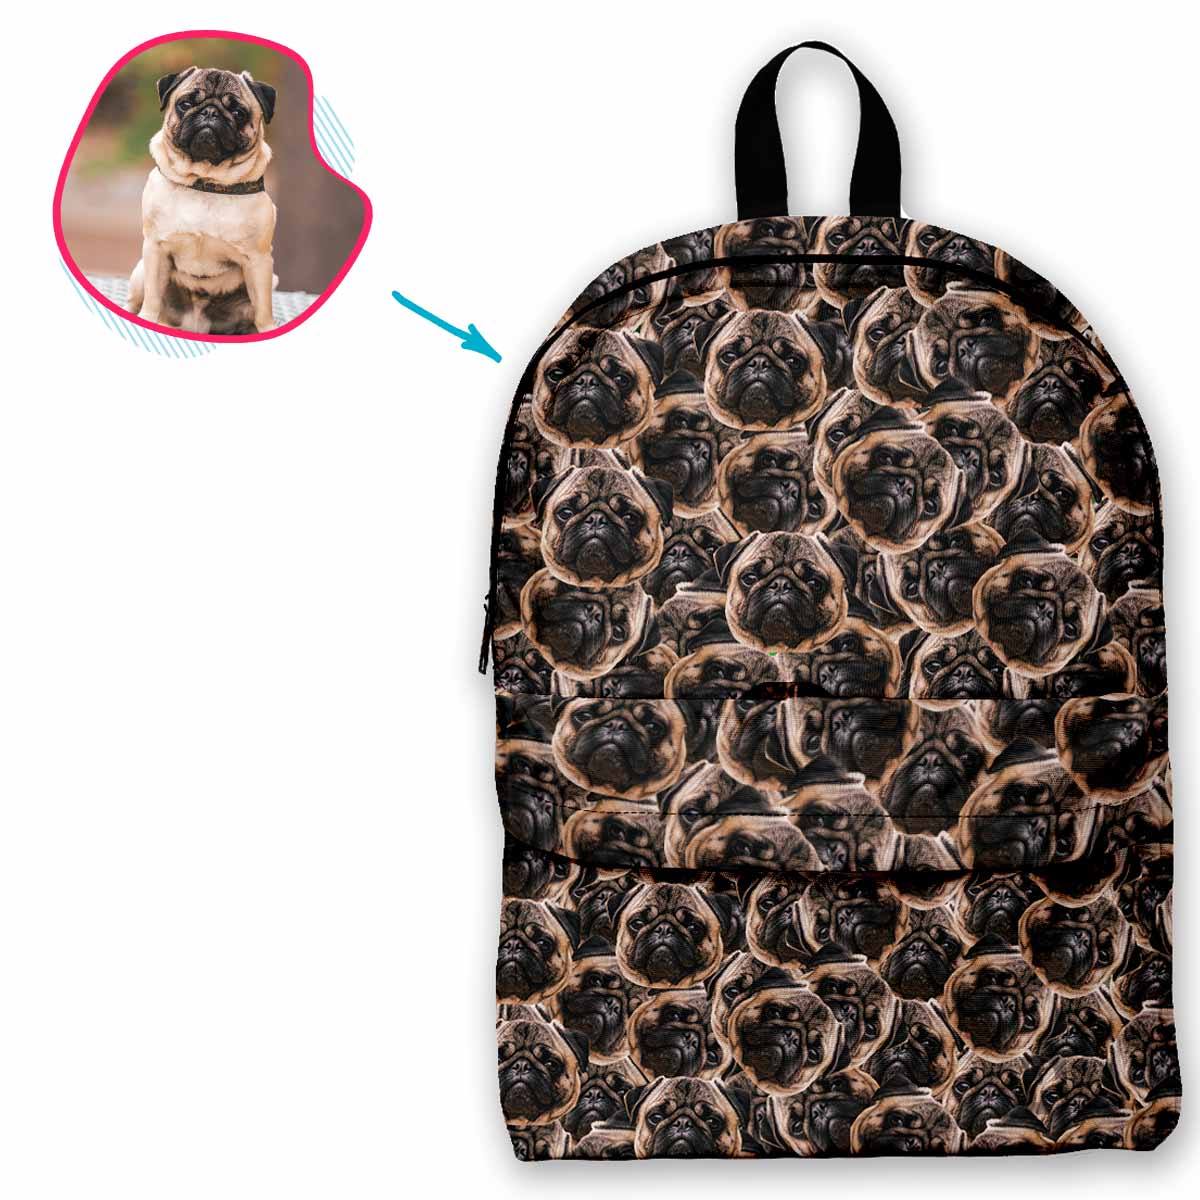 dog mash classic backpack personalized with photo of face printed on it